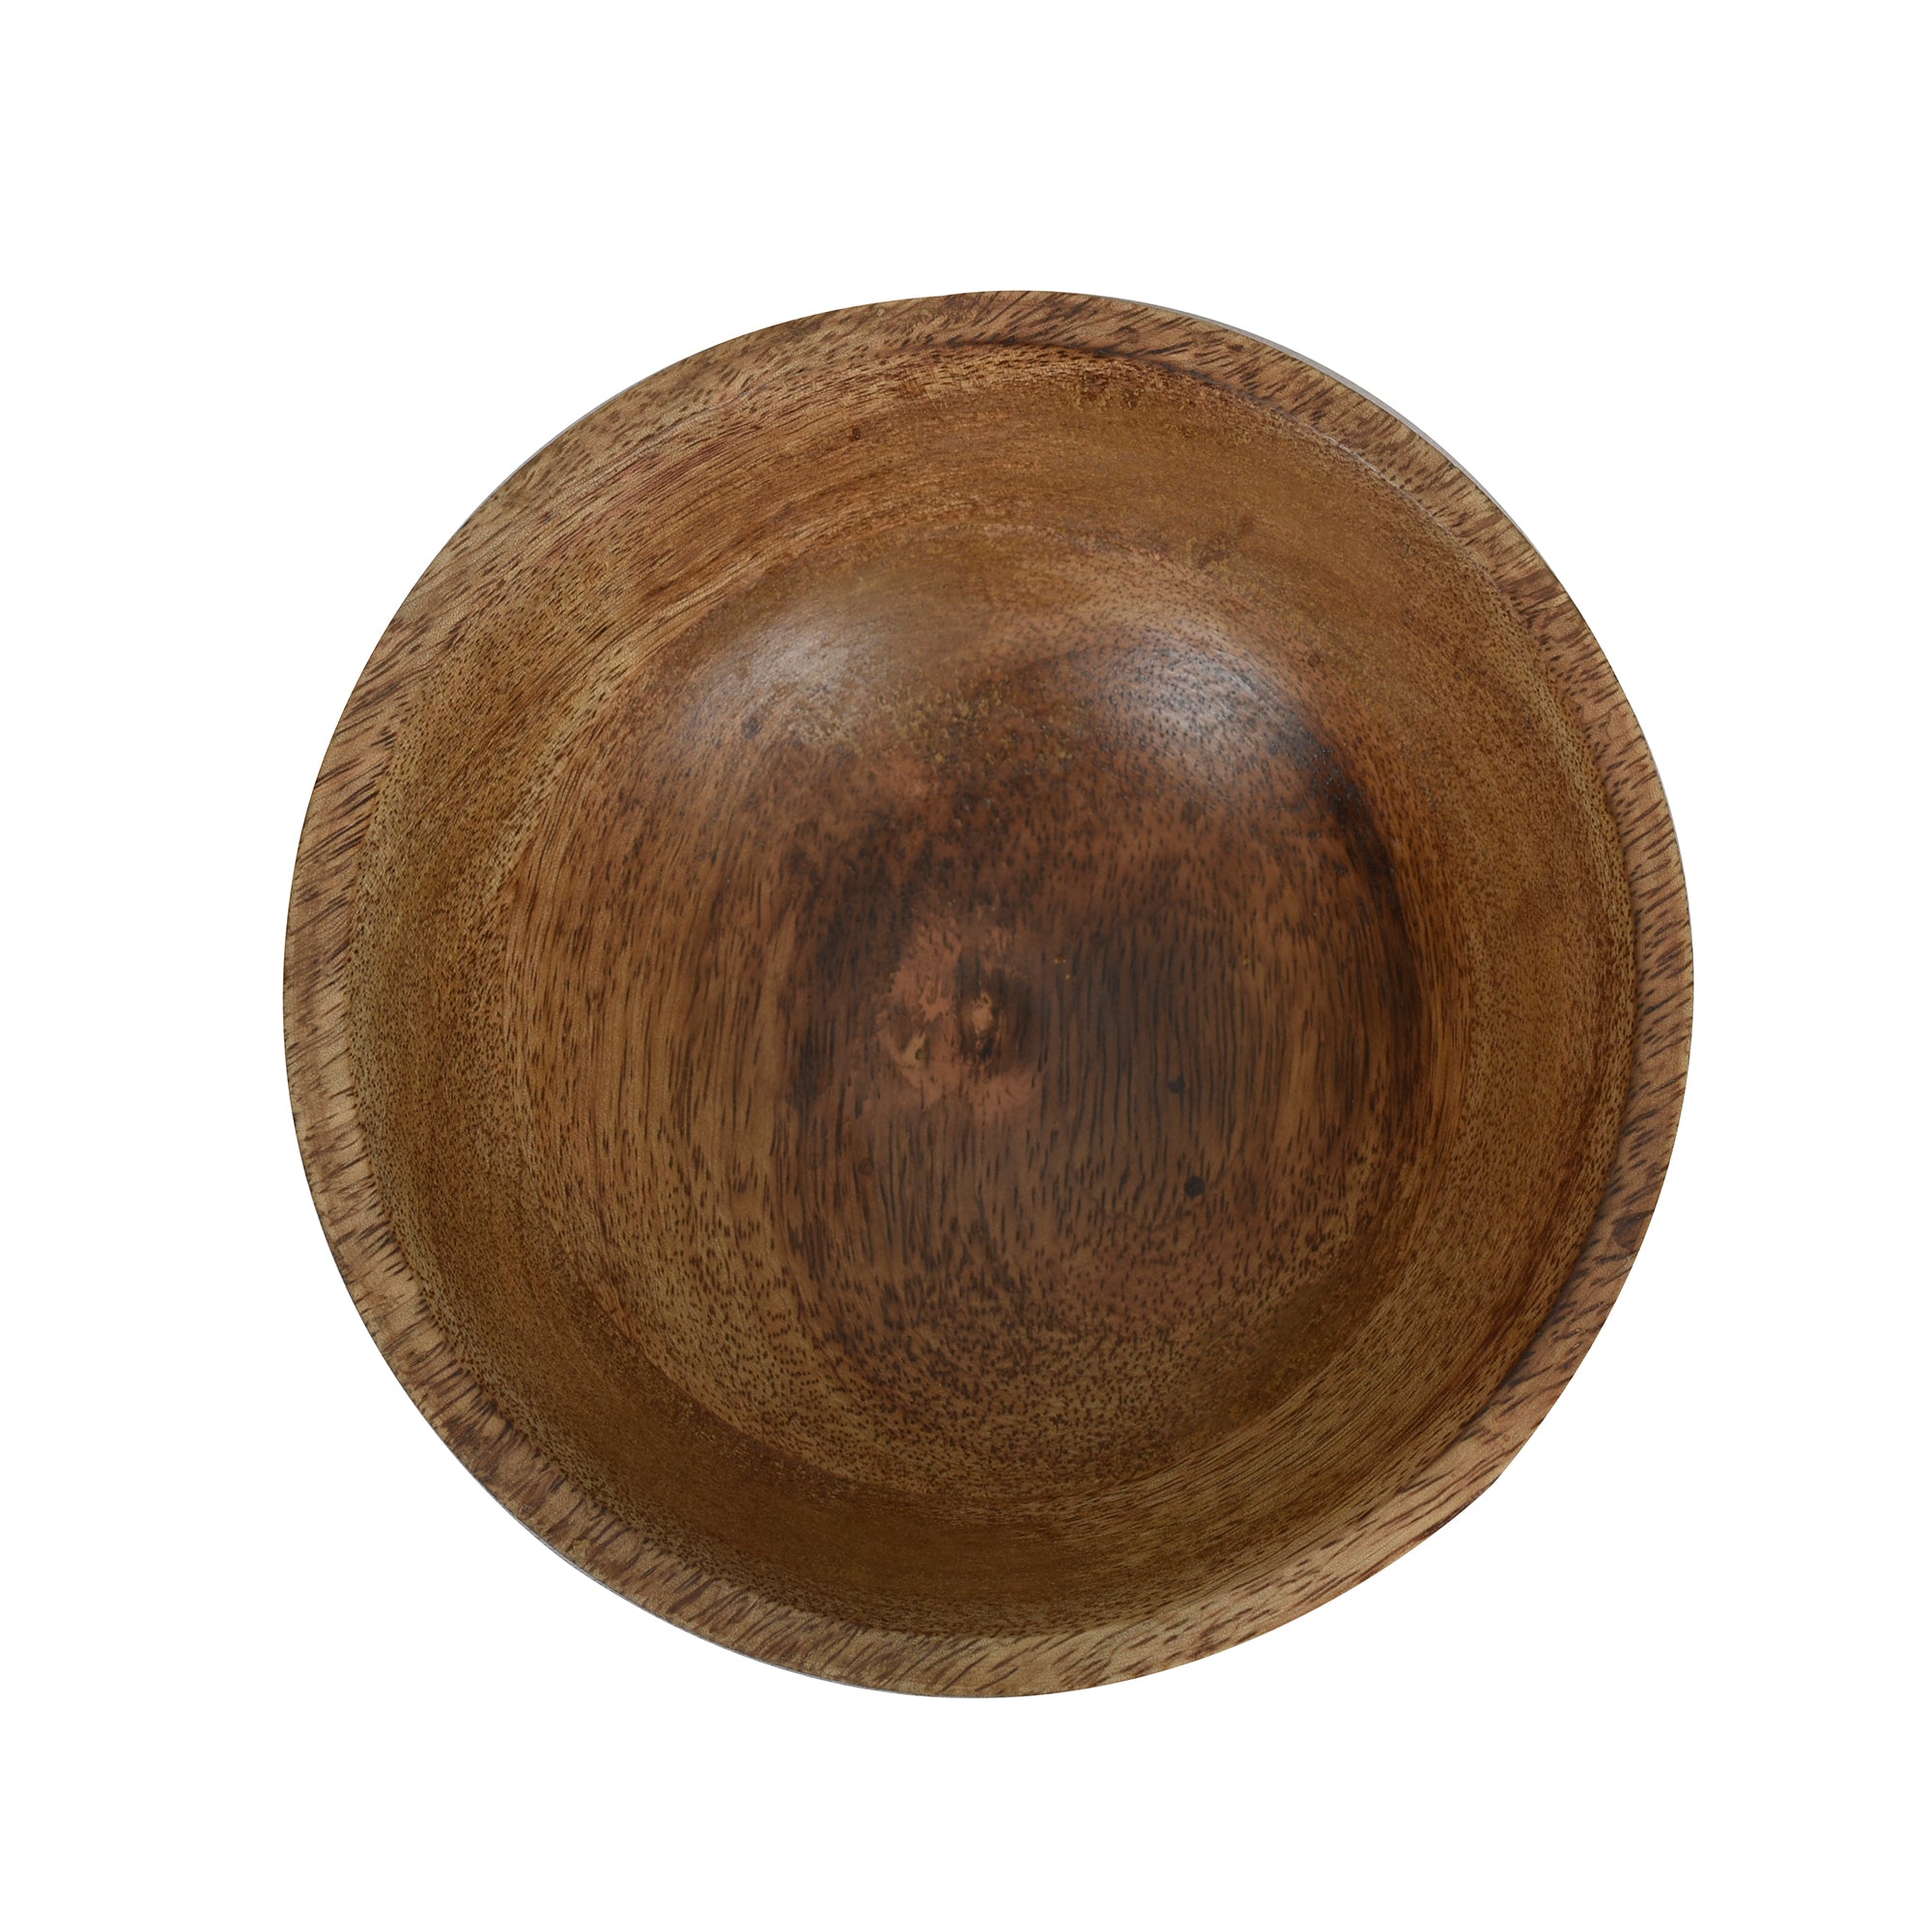 Aachman Snack Wooden Bowl 10 inches